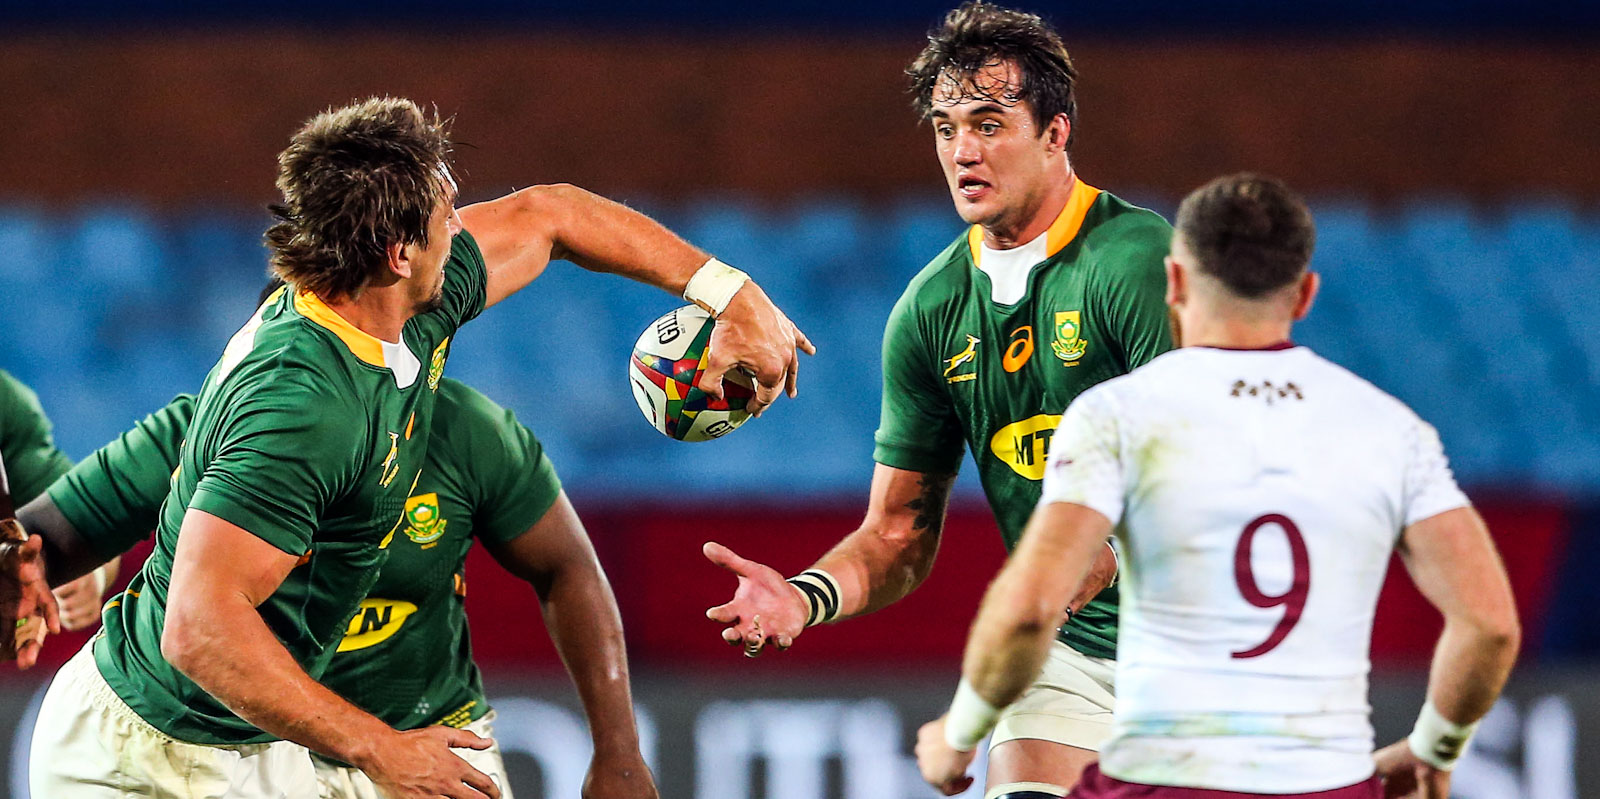 Franco Mostert had a typically busy outing in the Boks' first Test since winning the Rugby World Cup.